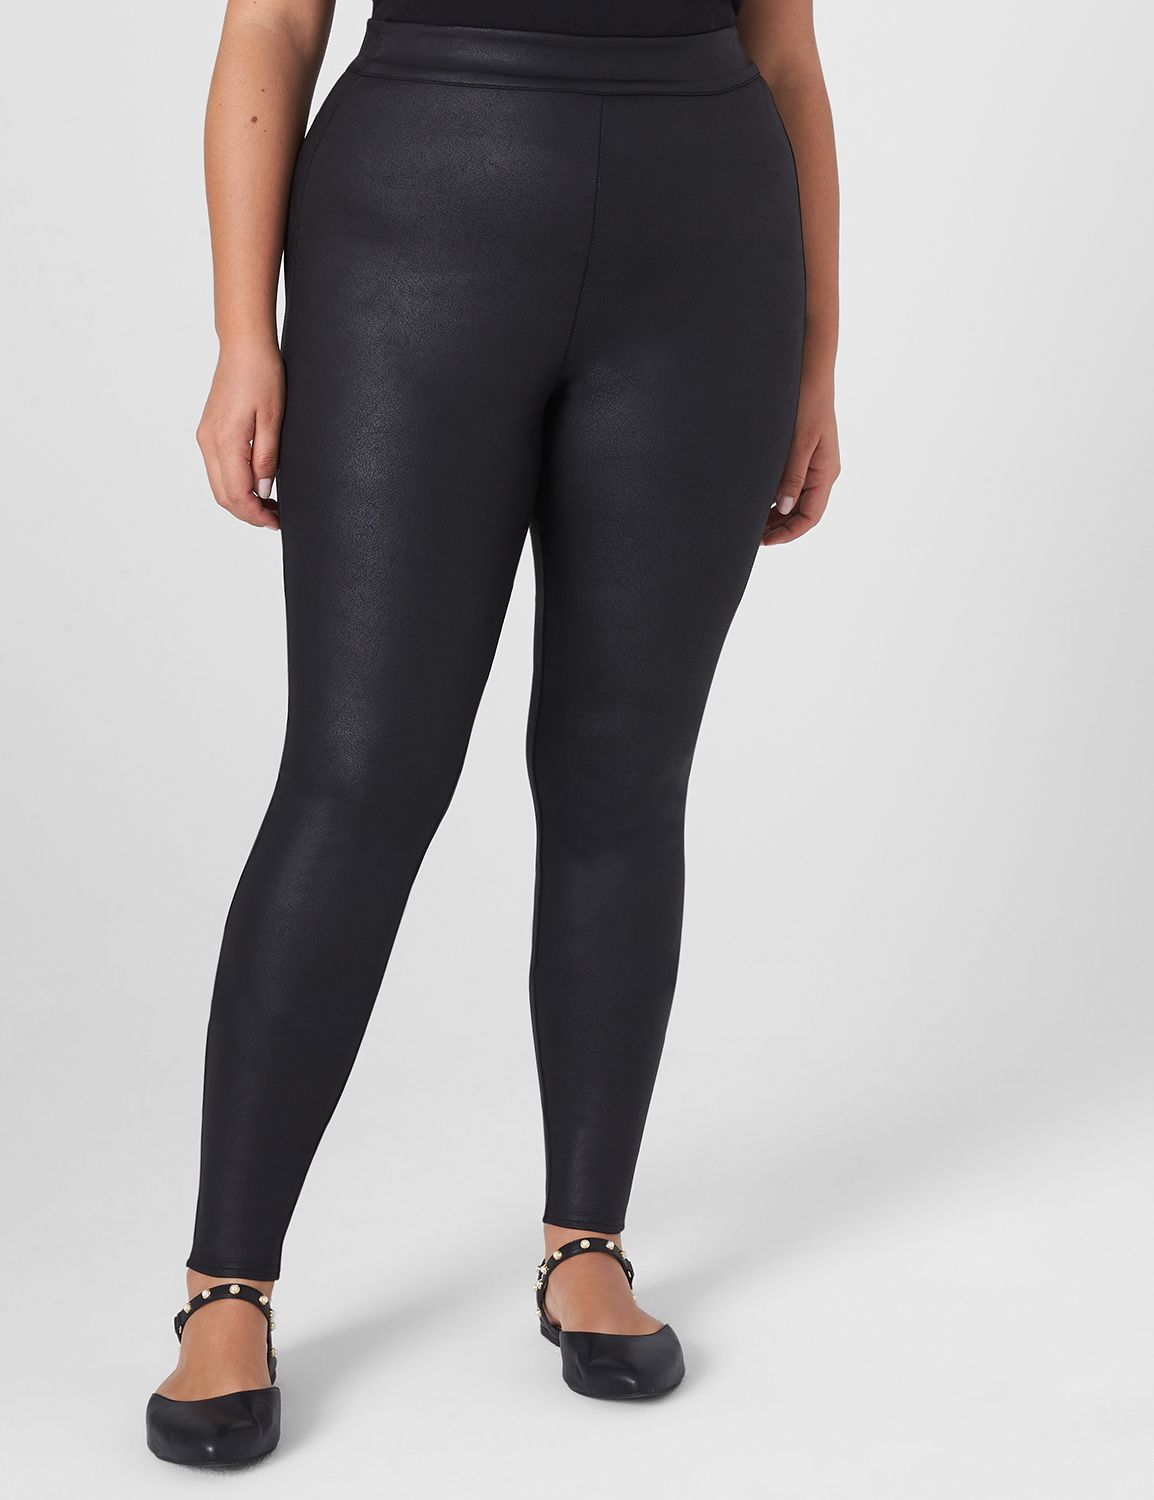 Pull-On High-Rise Legging With Innersculpt Technology